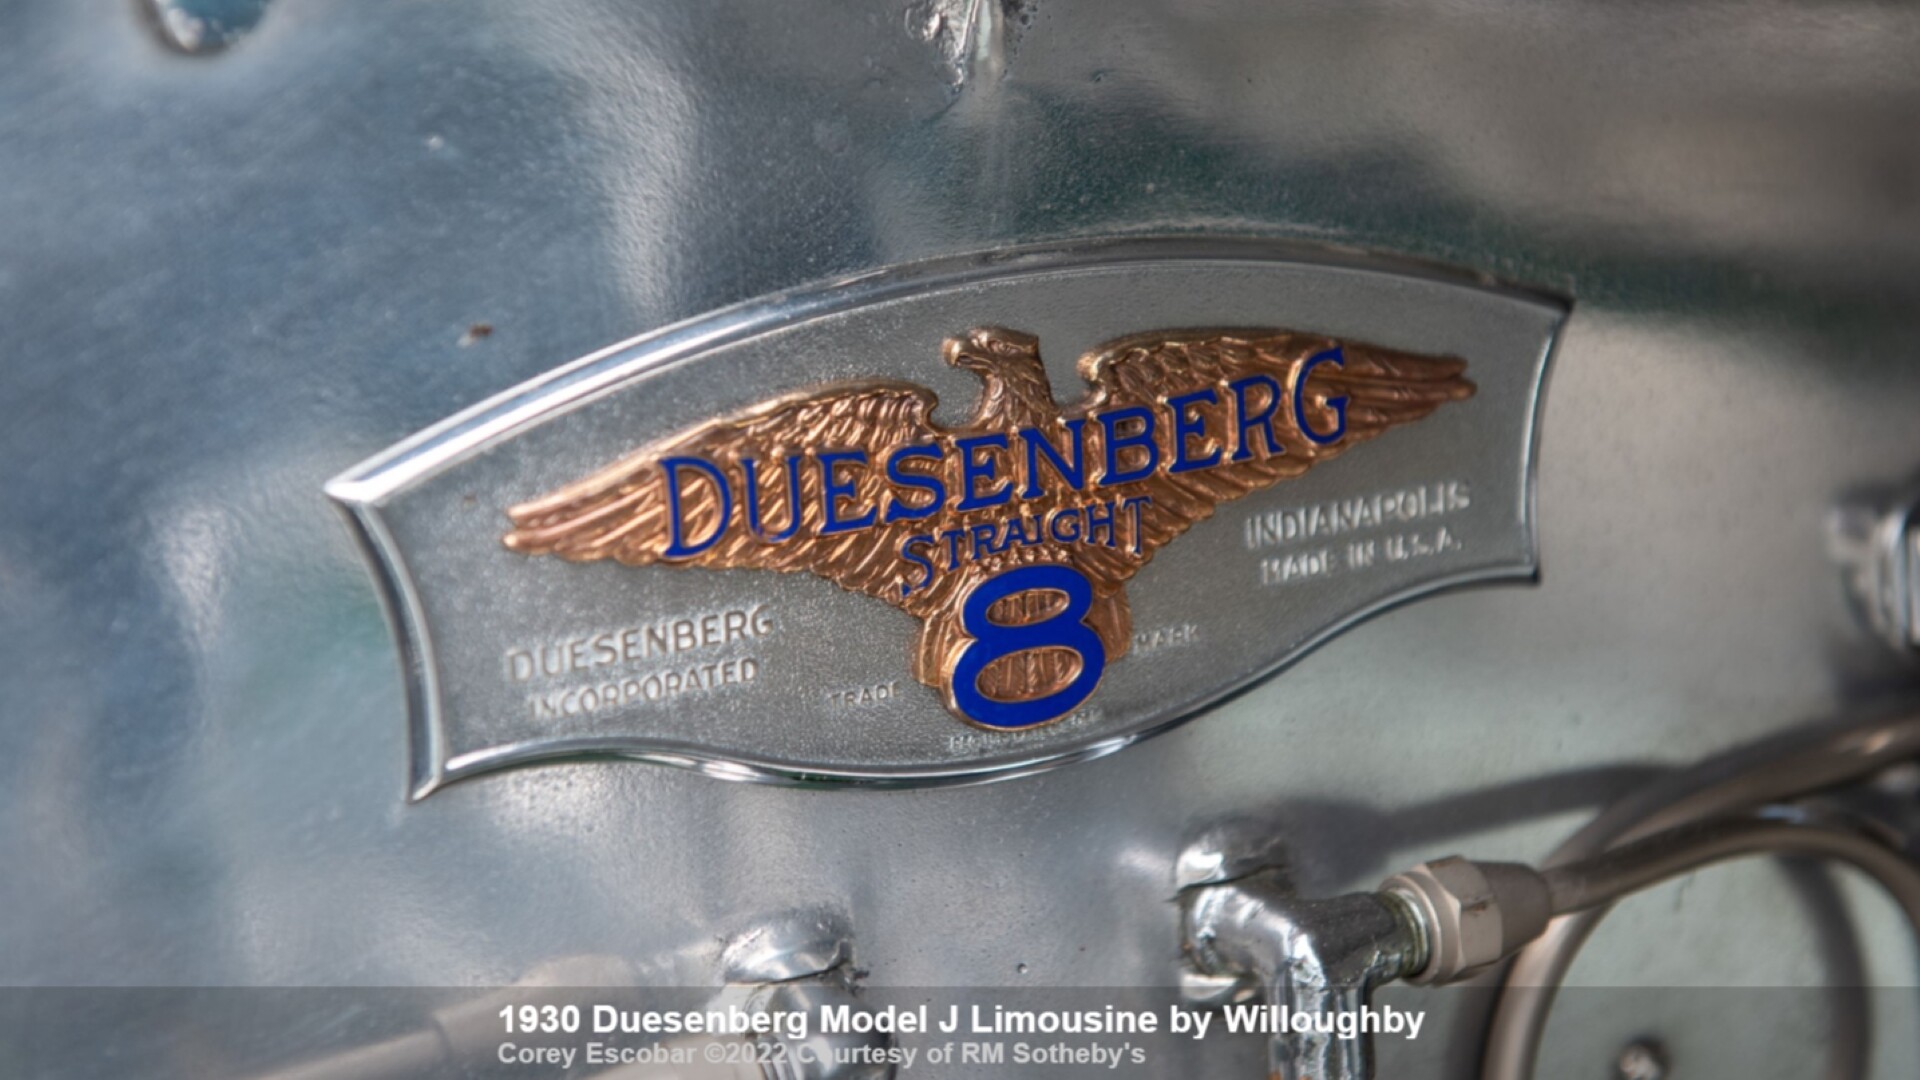 The Duesenberg Emblem On The 1930 Duesenberg Model J Limousine That Was Sold At The RM Sotheby's Auction (Credits RM Sotheby's)